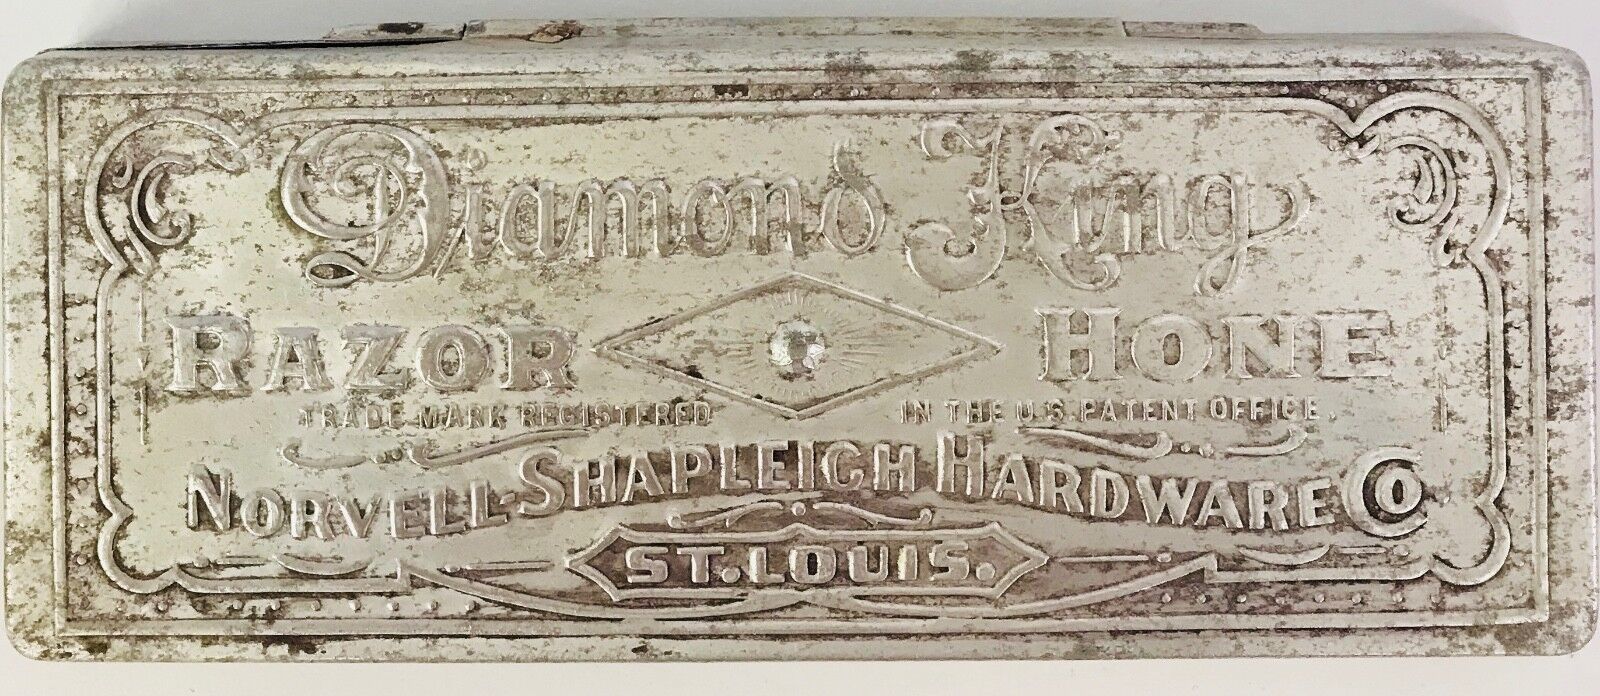 Primary image for Antique Diamond King Razor Hone For Norvell-Shapleich Hardware Co St Louis